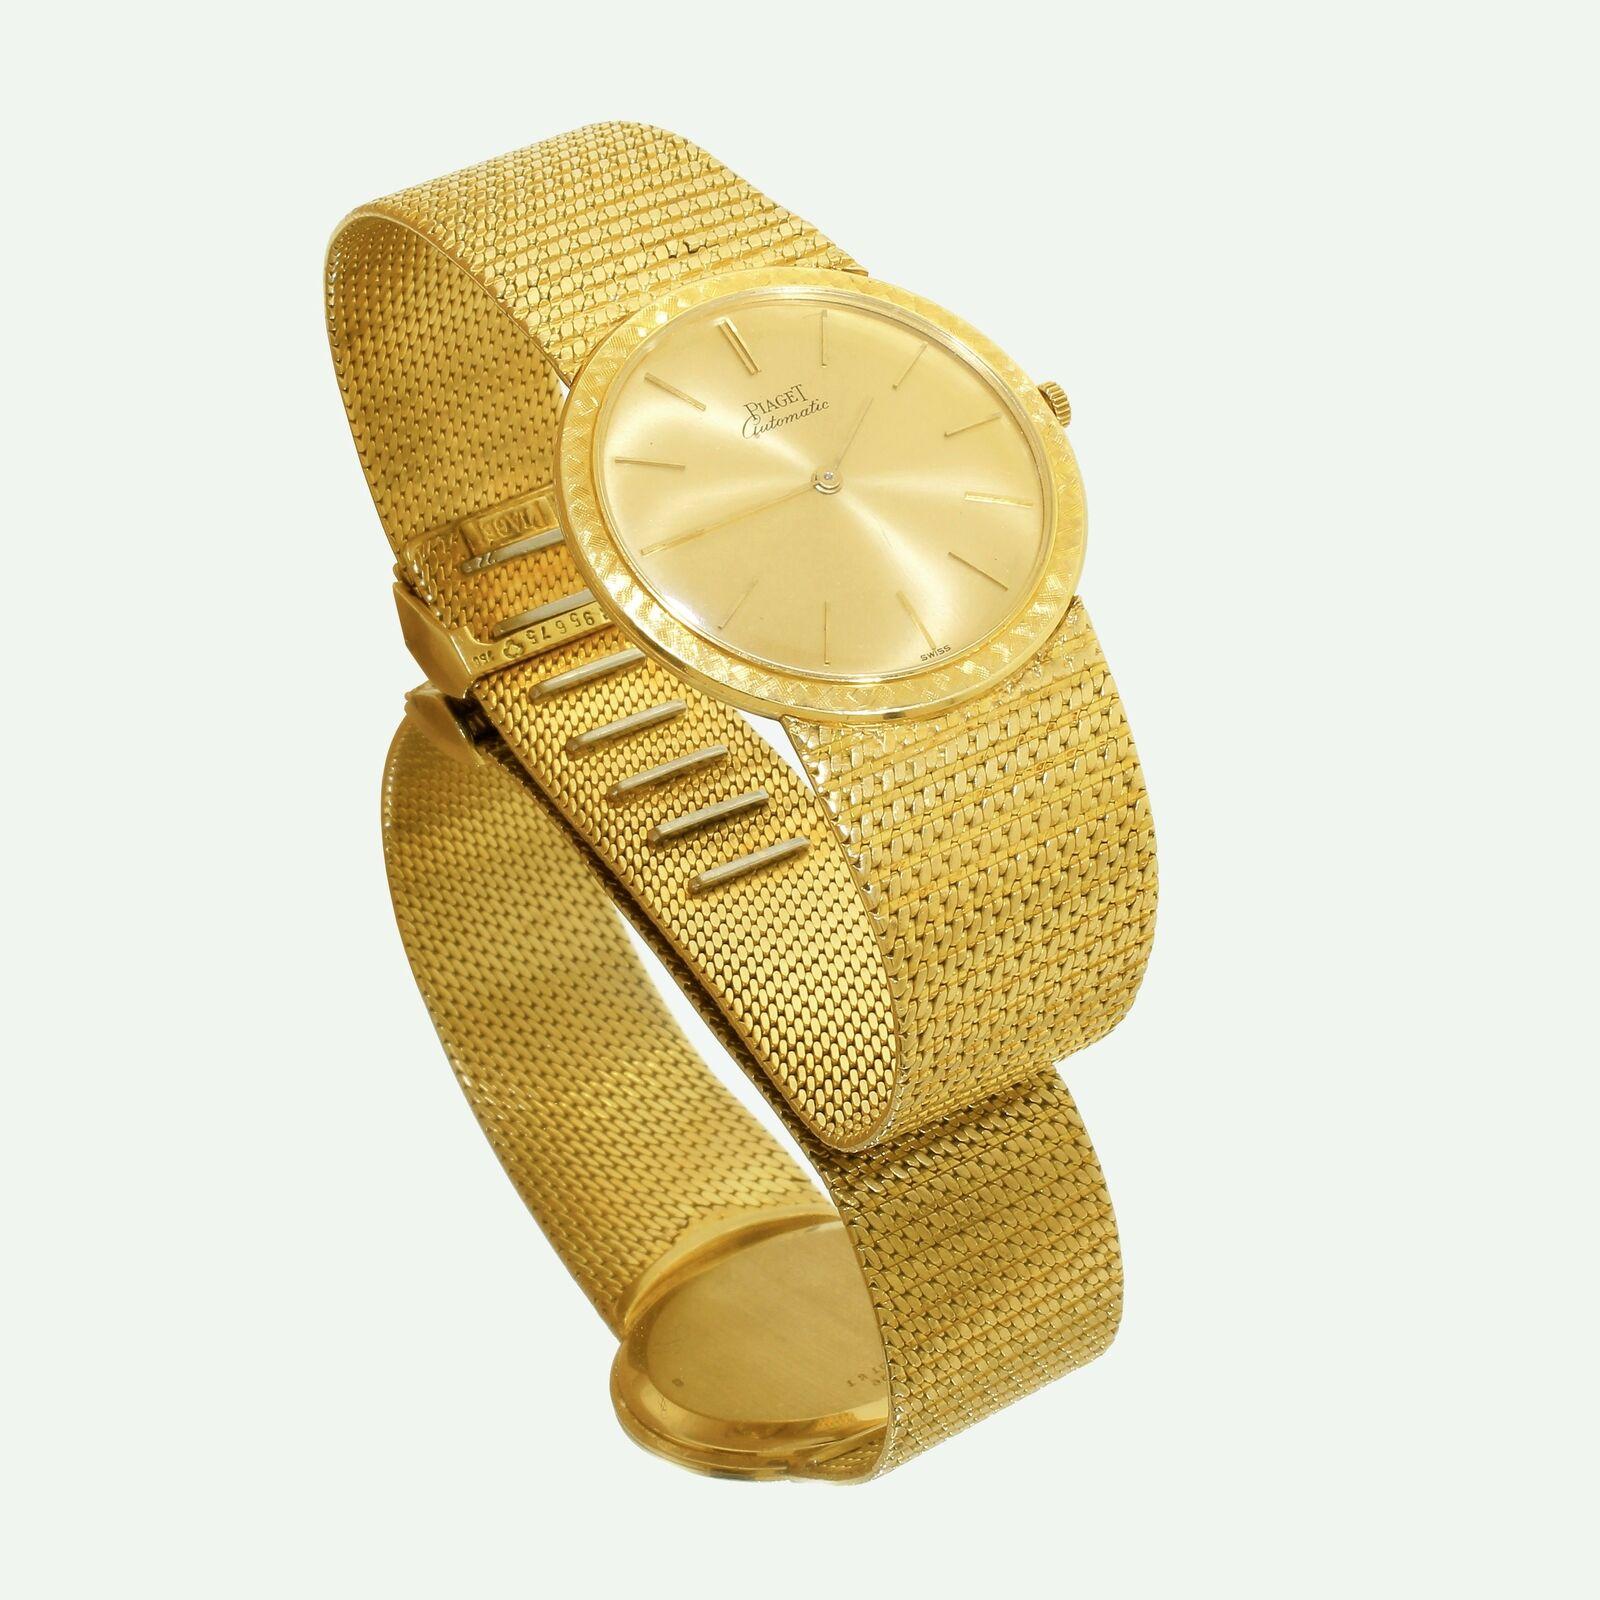 Piaget Ref. 12103 18k Gold Automatic, circa late 1960's. This great classic timepiece has been in the same family since new, and has been well looked after.
When worn it looks tastefully elegant, very classy and of course timeless. This watch can